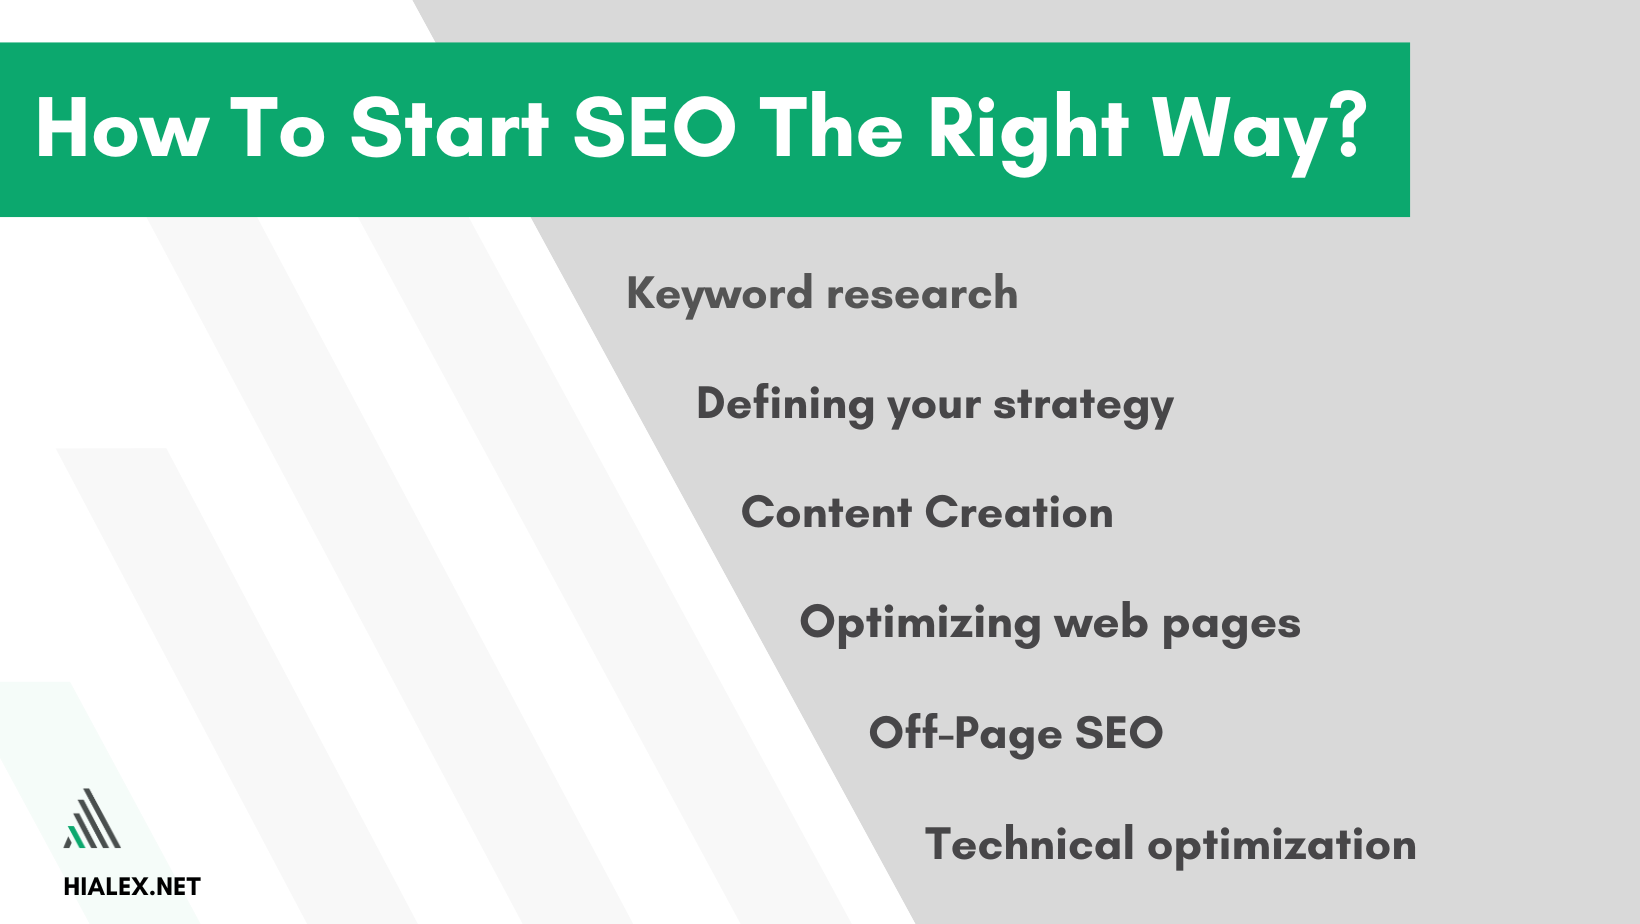 Get started with SEO